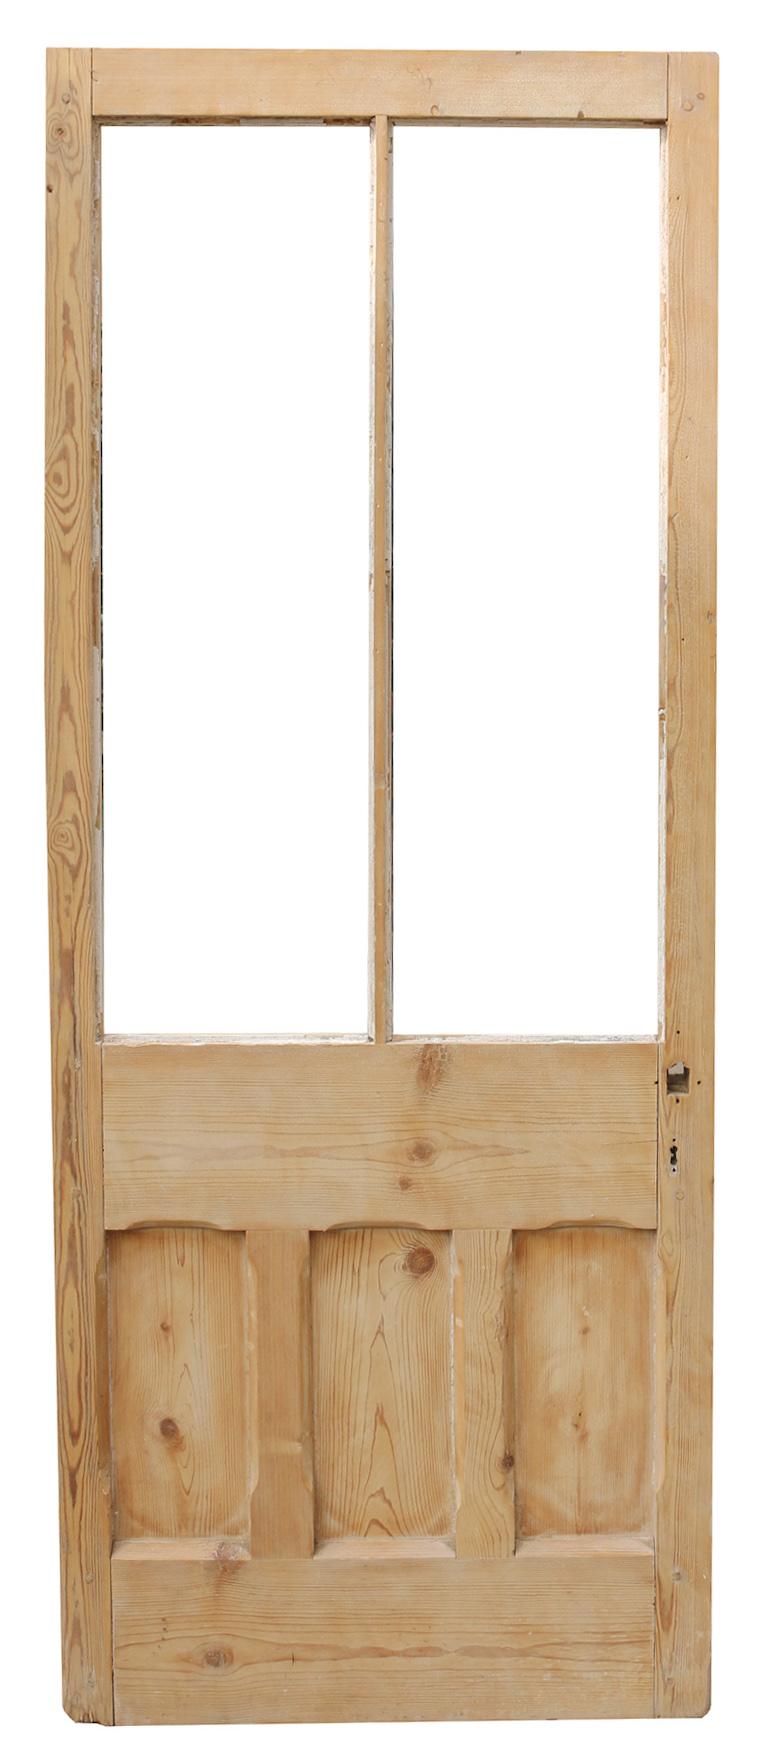 A reclaimed pine door suitable for interior or exterior use, there are two panels for glazing.